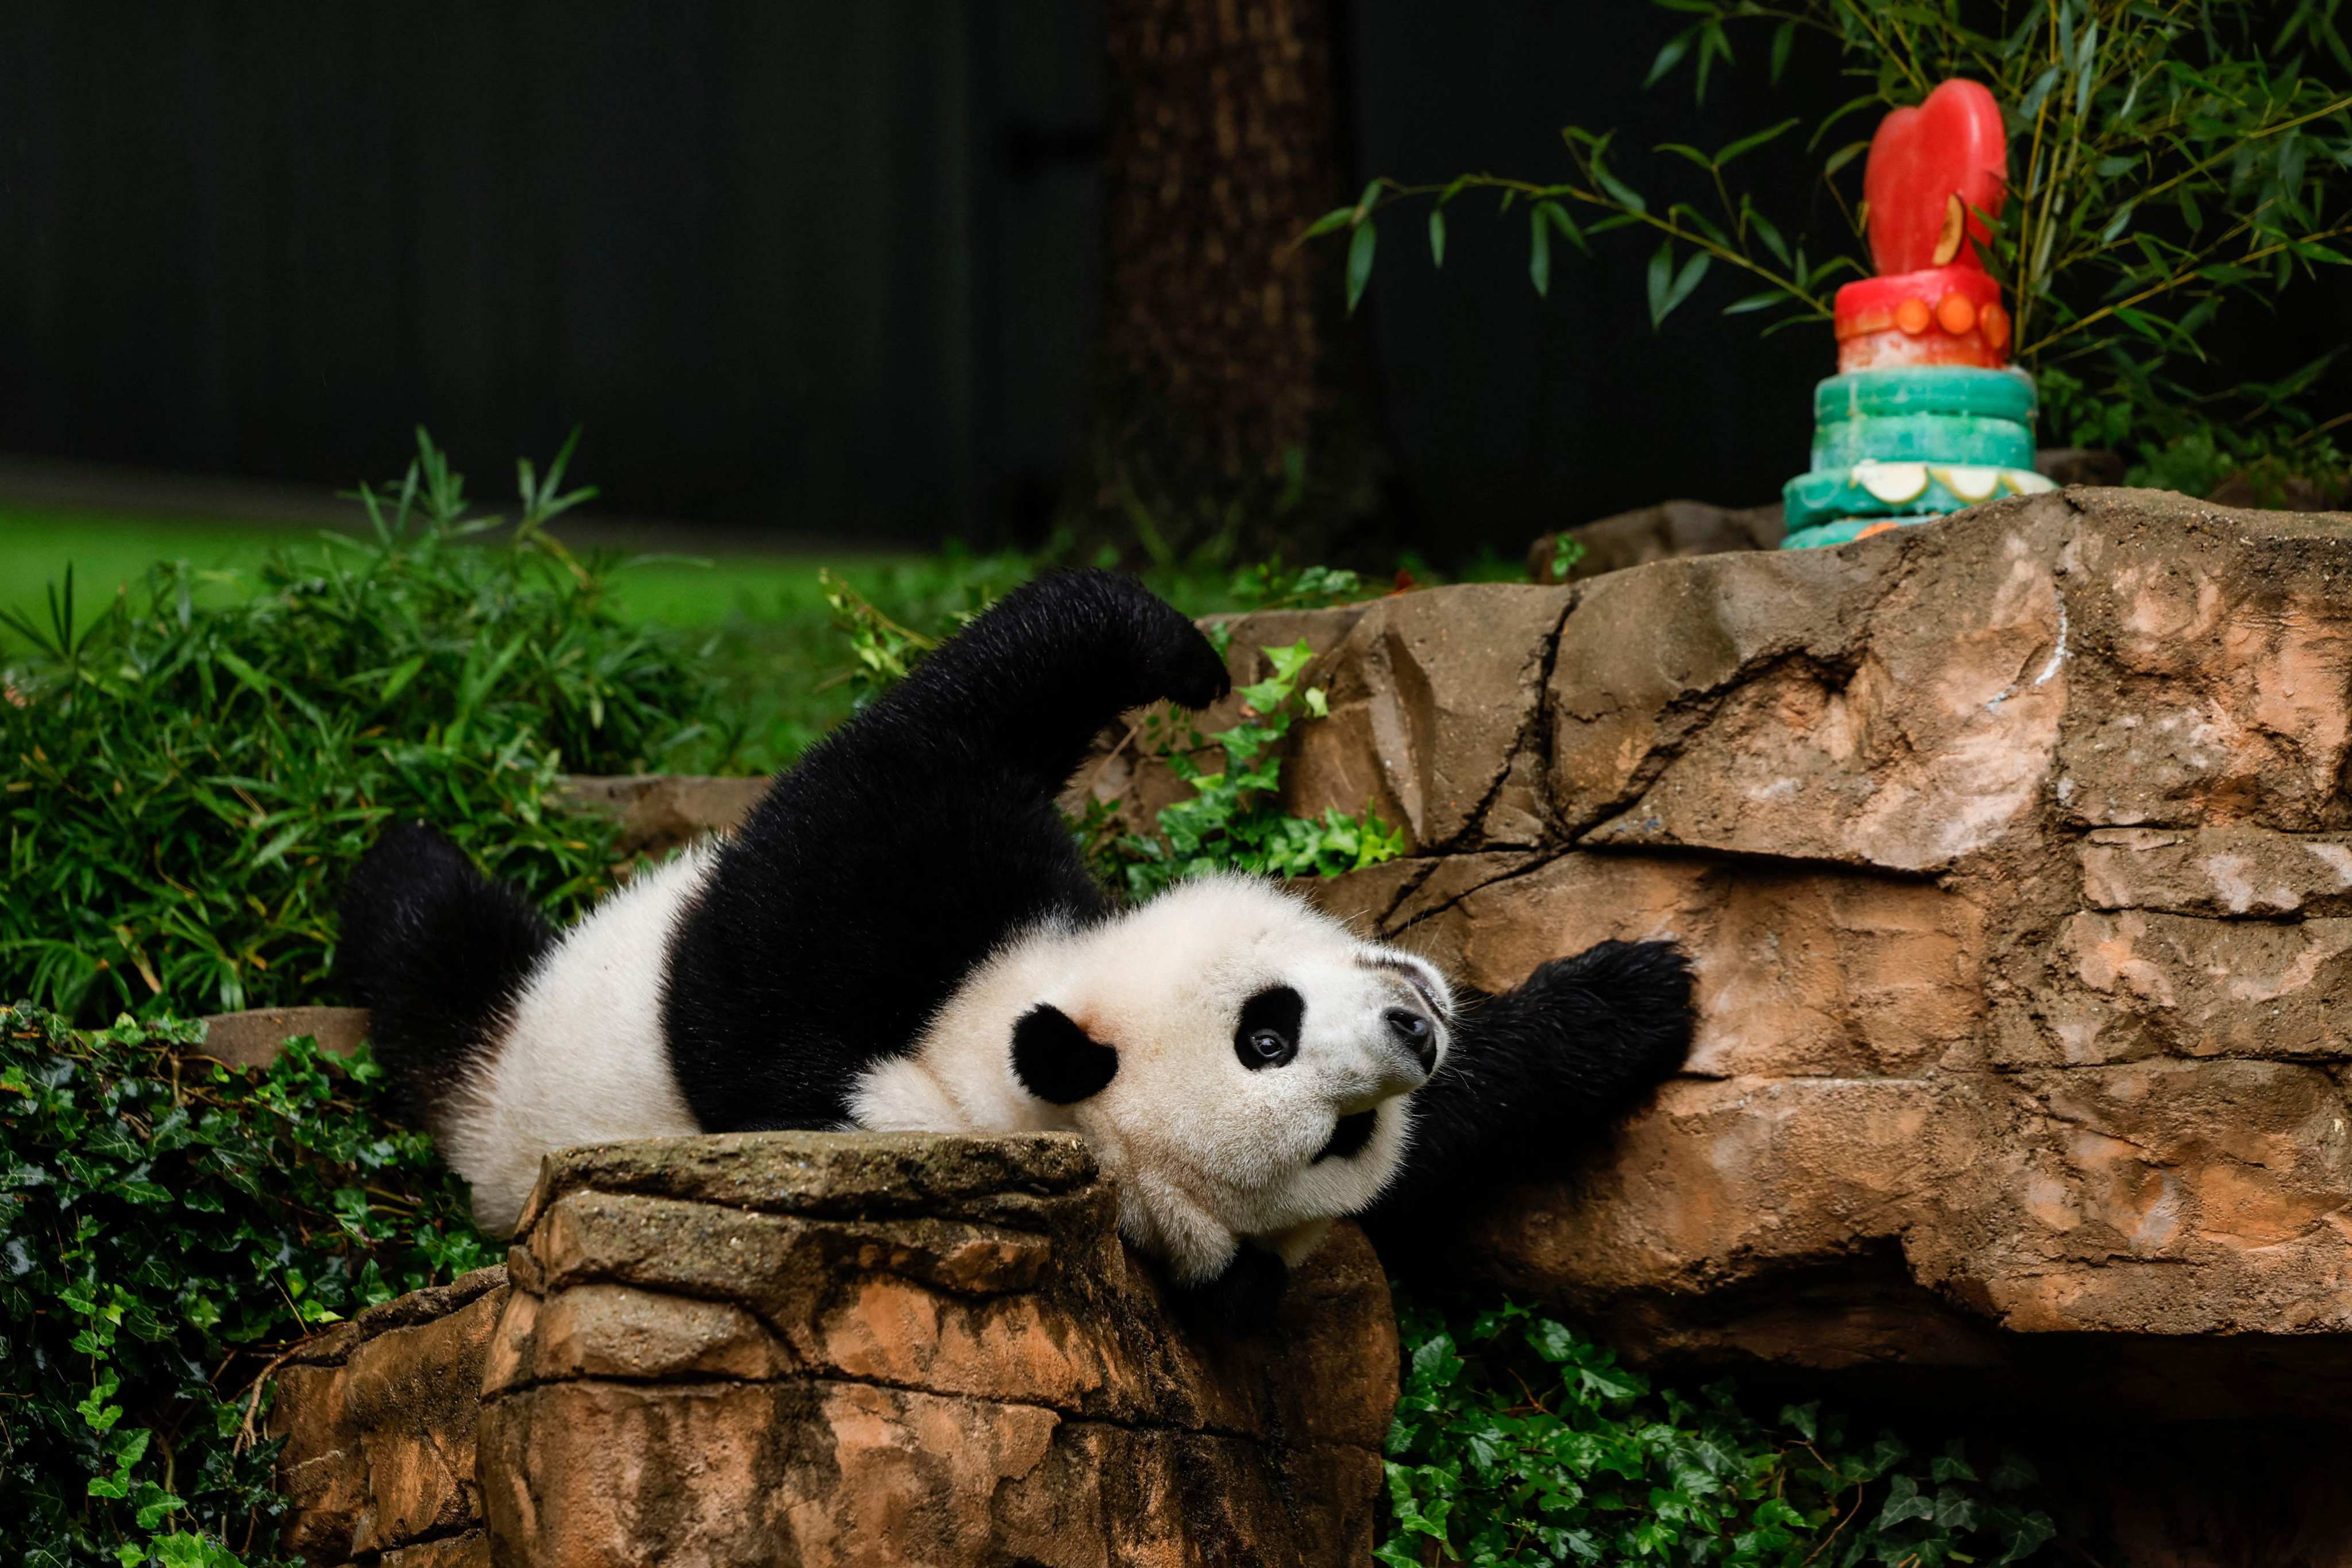 Male giant panda Xiao Qi Ji rolls around in his enclosure during a “Panda Palooza” event at the Smithsonian National Zoo in Washington on Monday. Photo: Getty Images via AFP